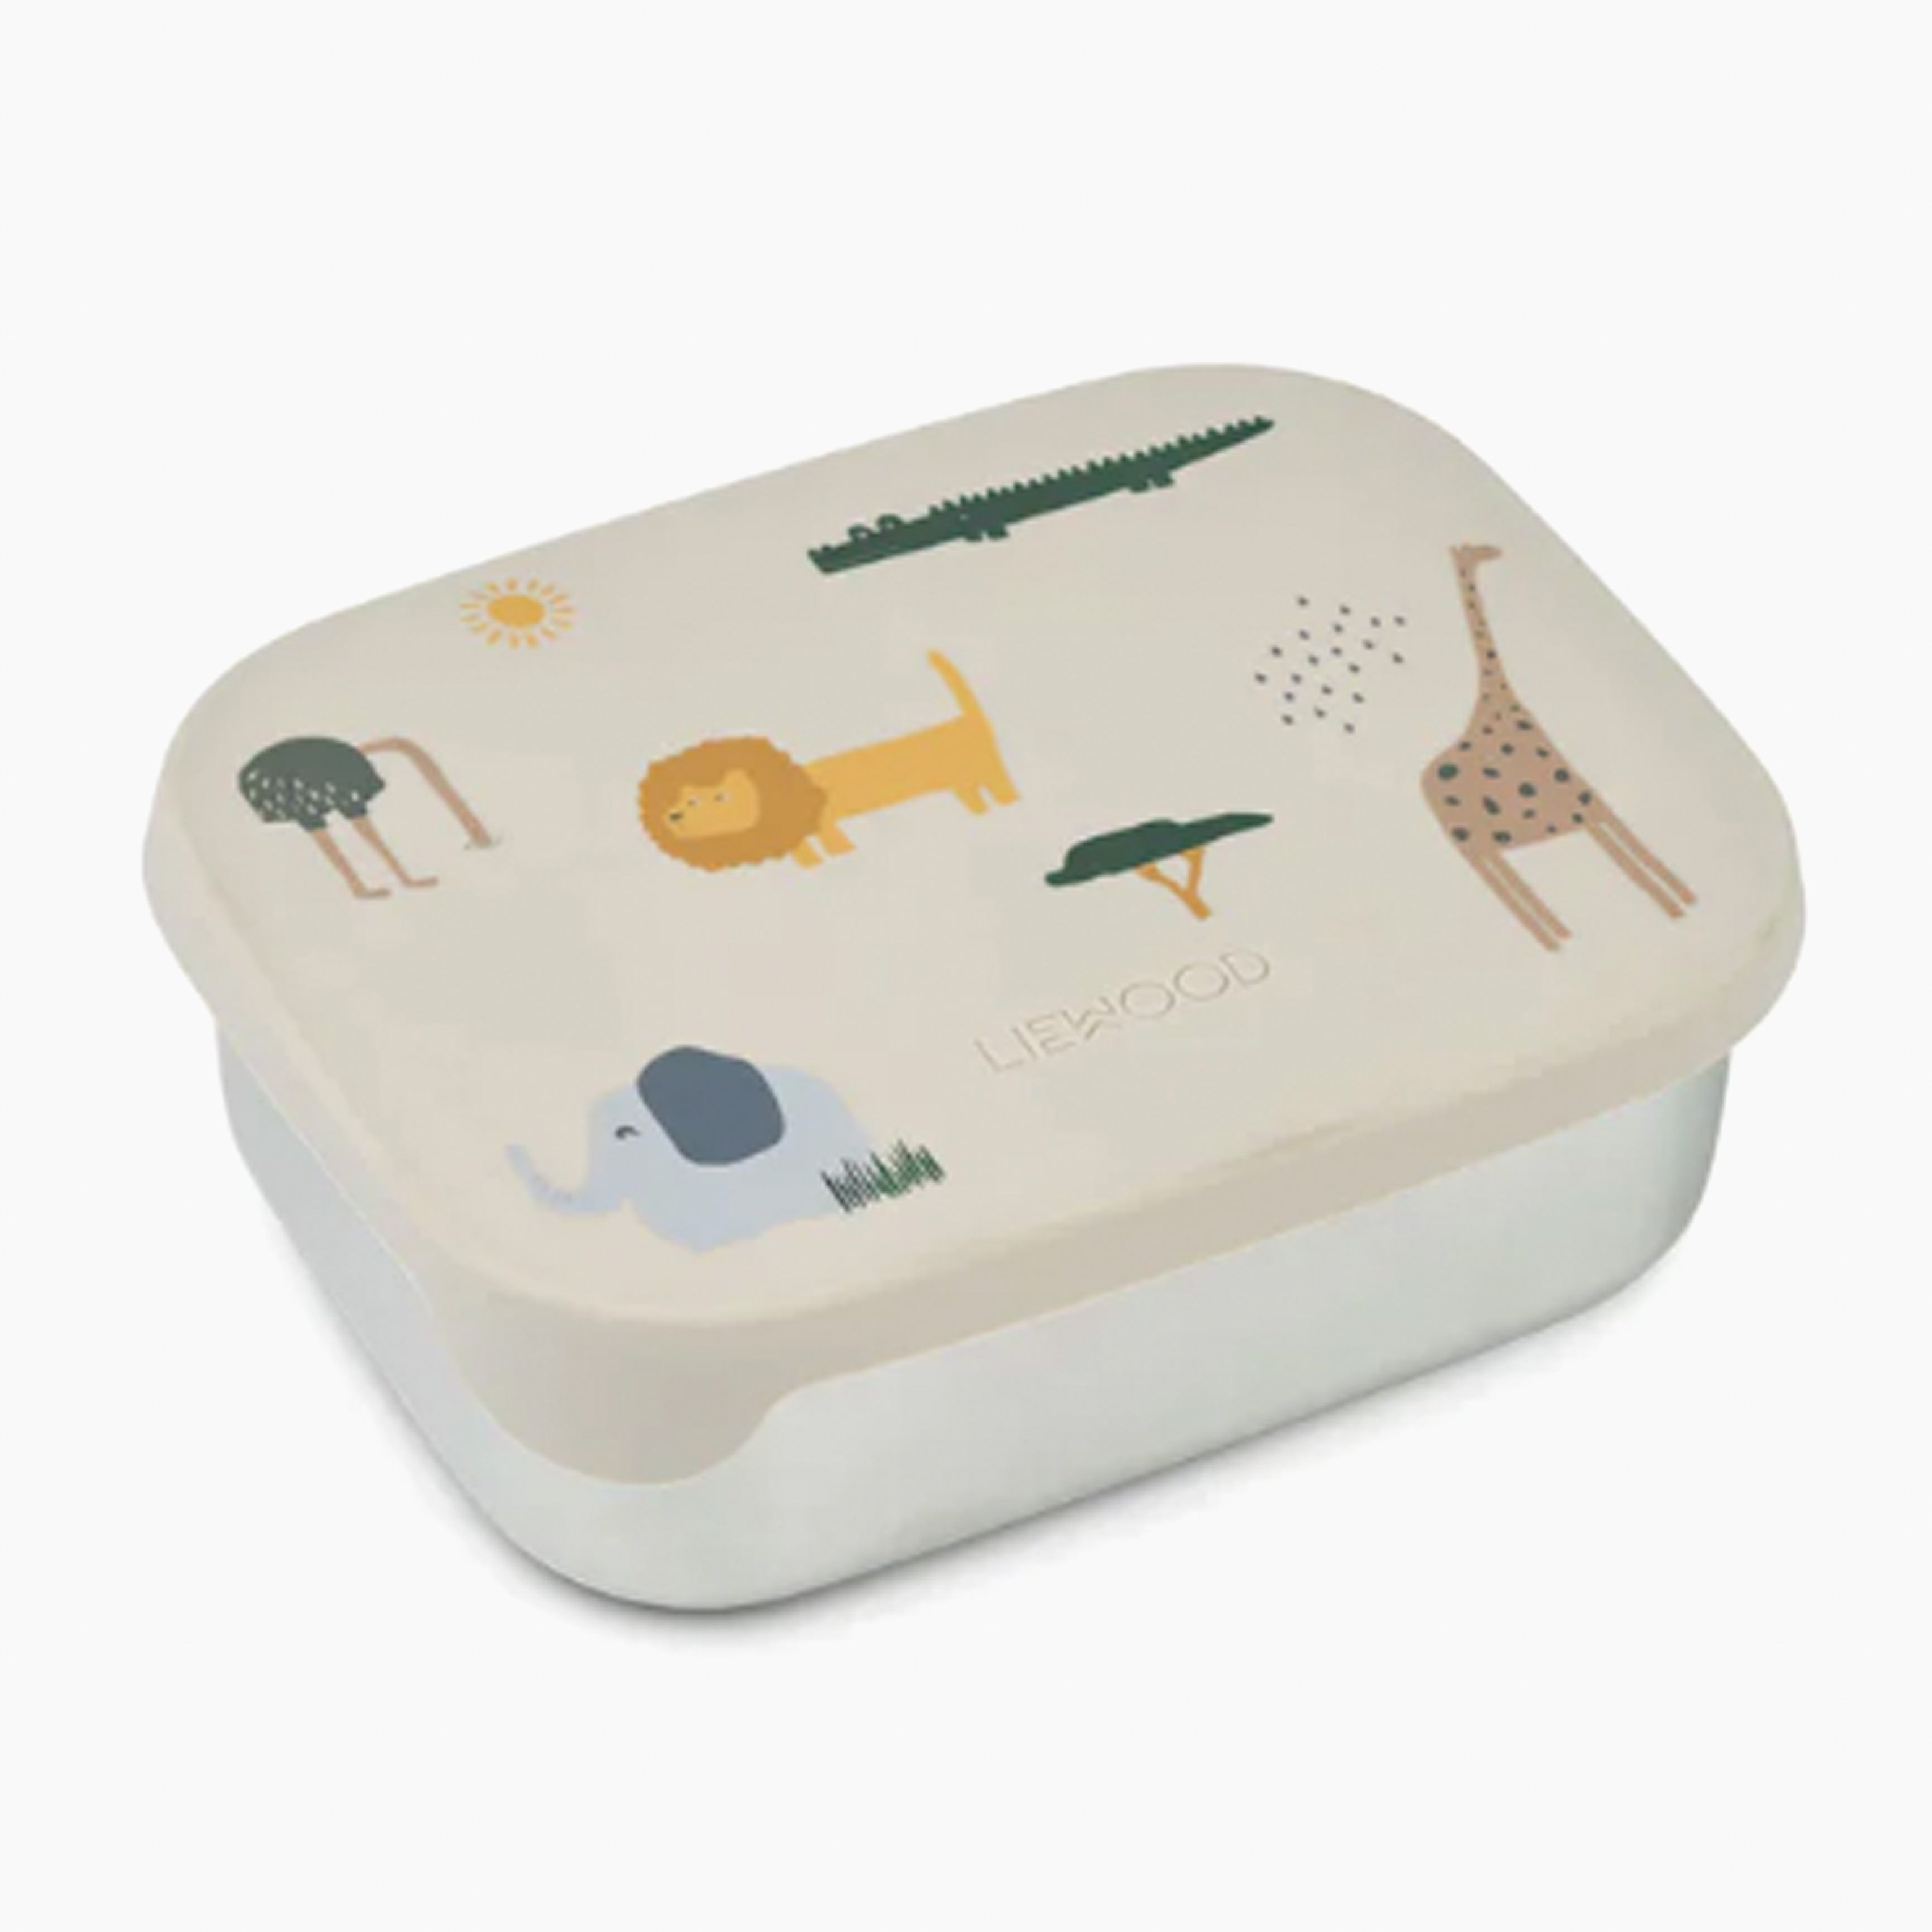 An image of Lunch Box - Kids Lunch Box - Liewood Arthur Lunch Box | Small Smart UK